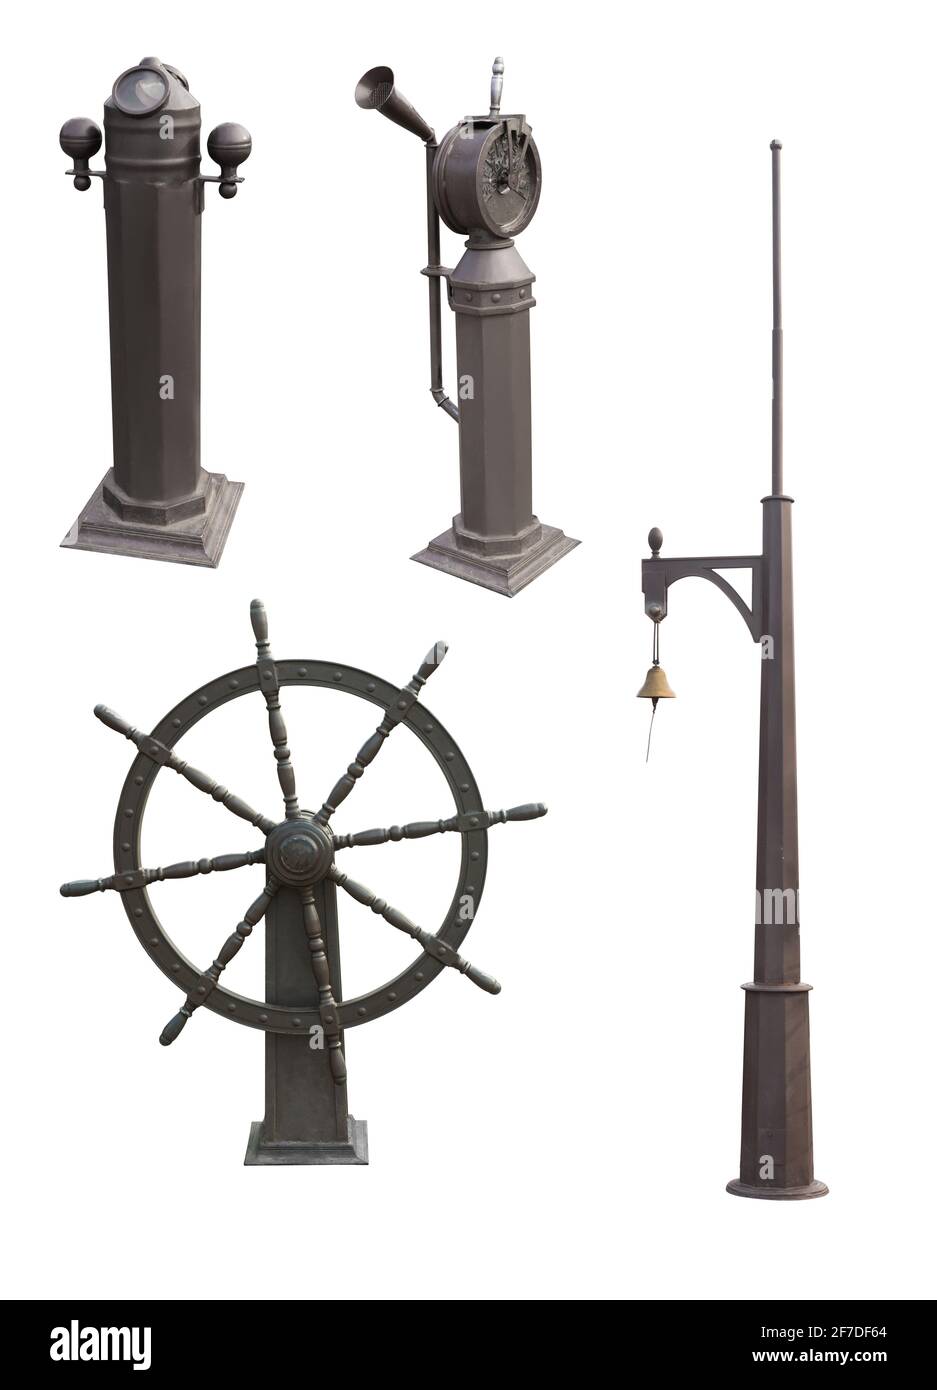 Vintage ship instruments, on a white background in isolation collage Stock Photo